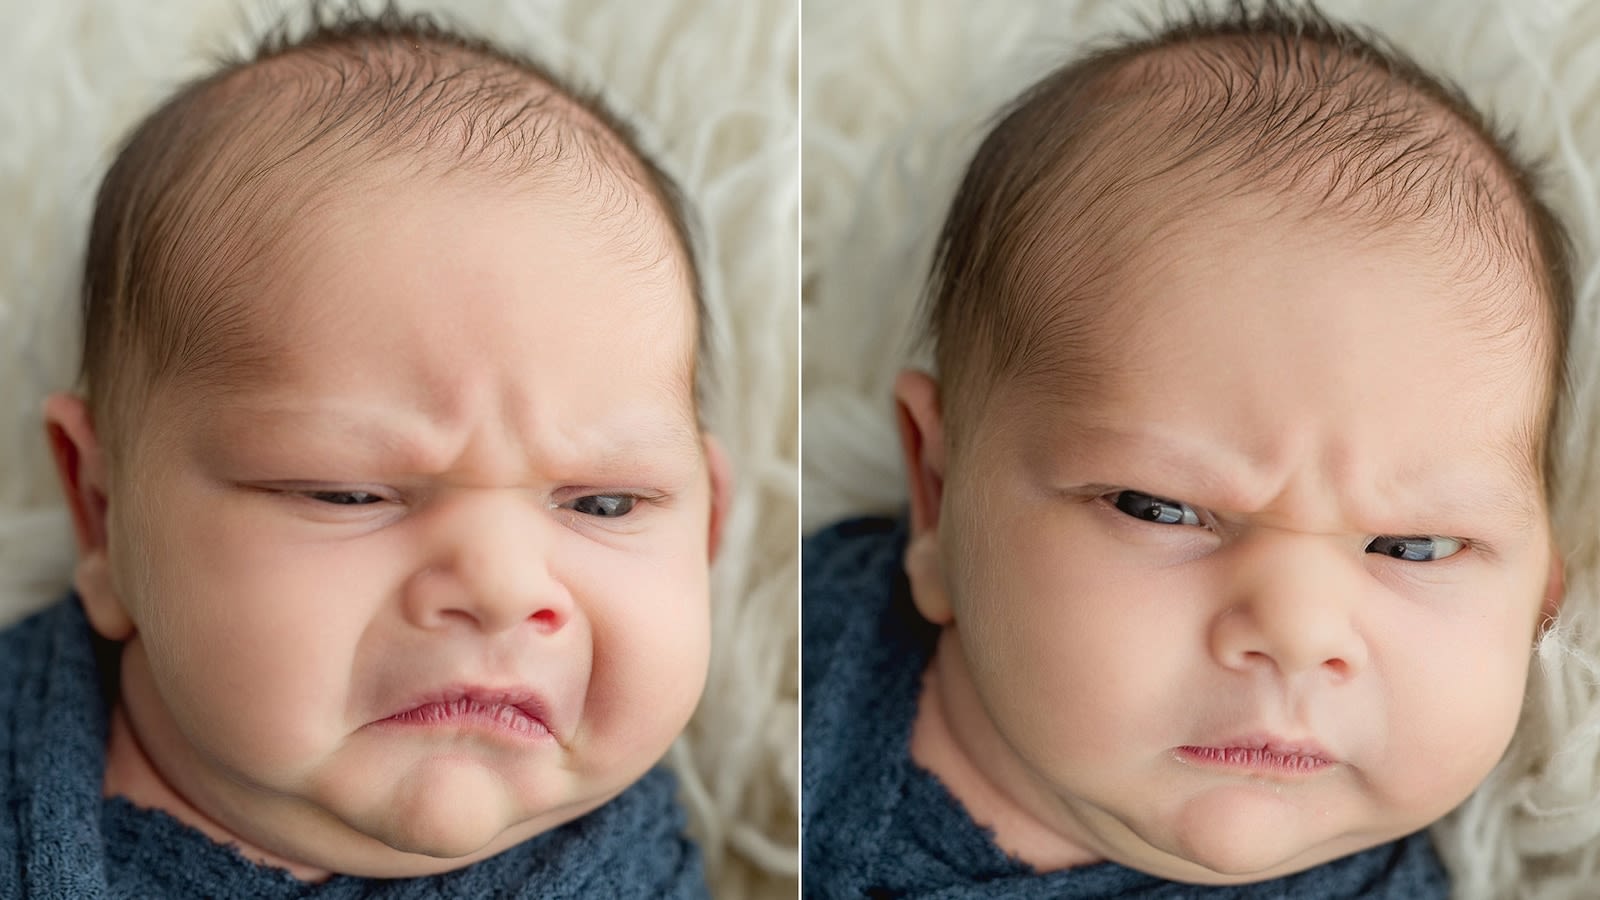 Photographer speaks out after photo shoot of baby with grumpy expression went viral